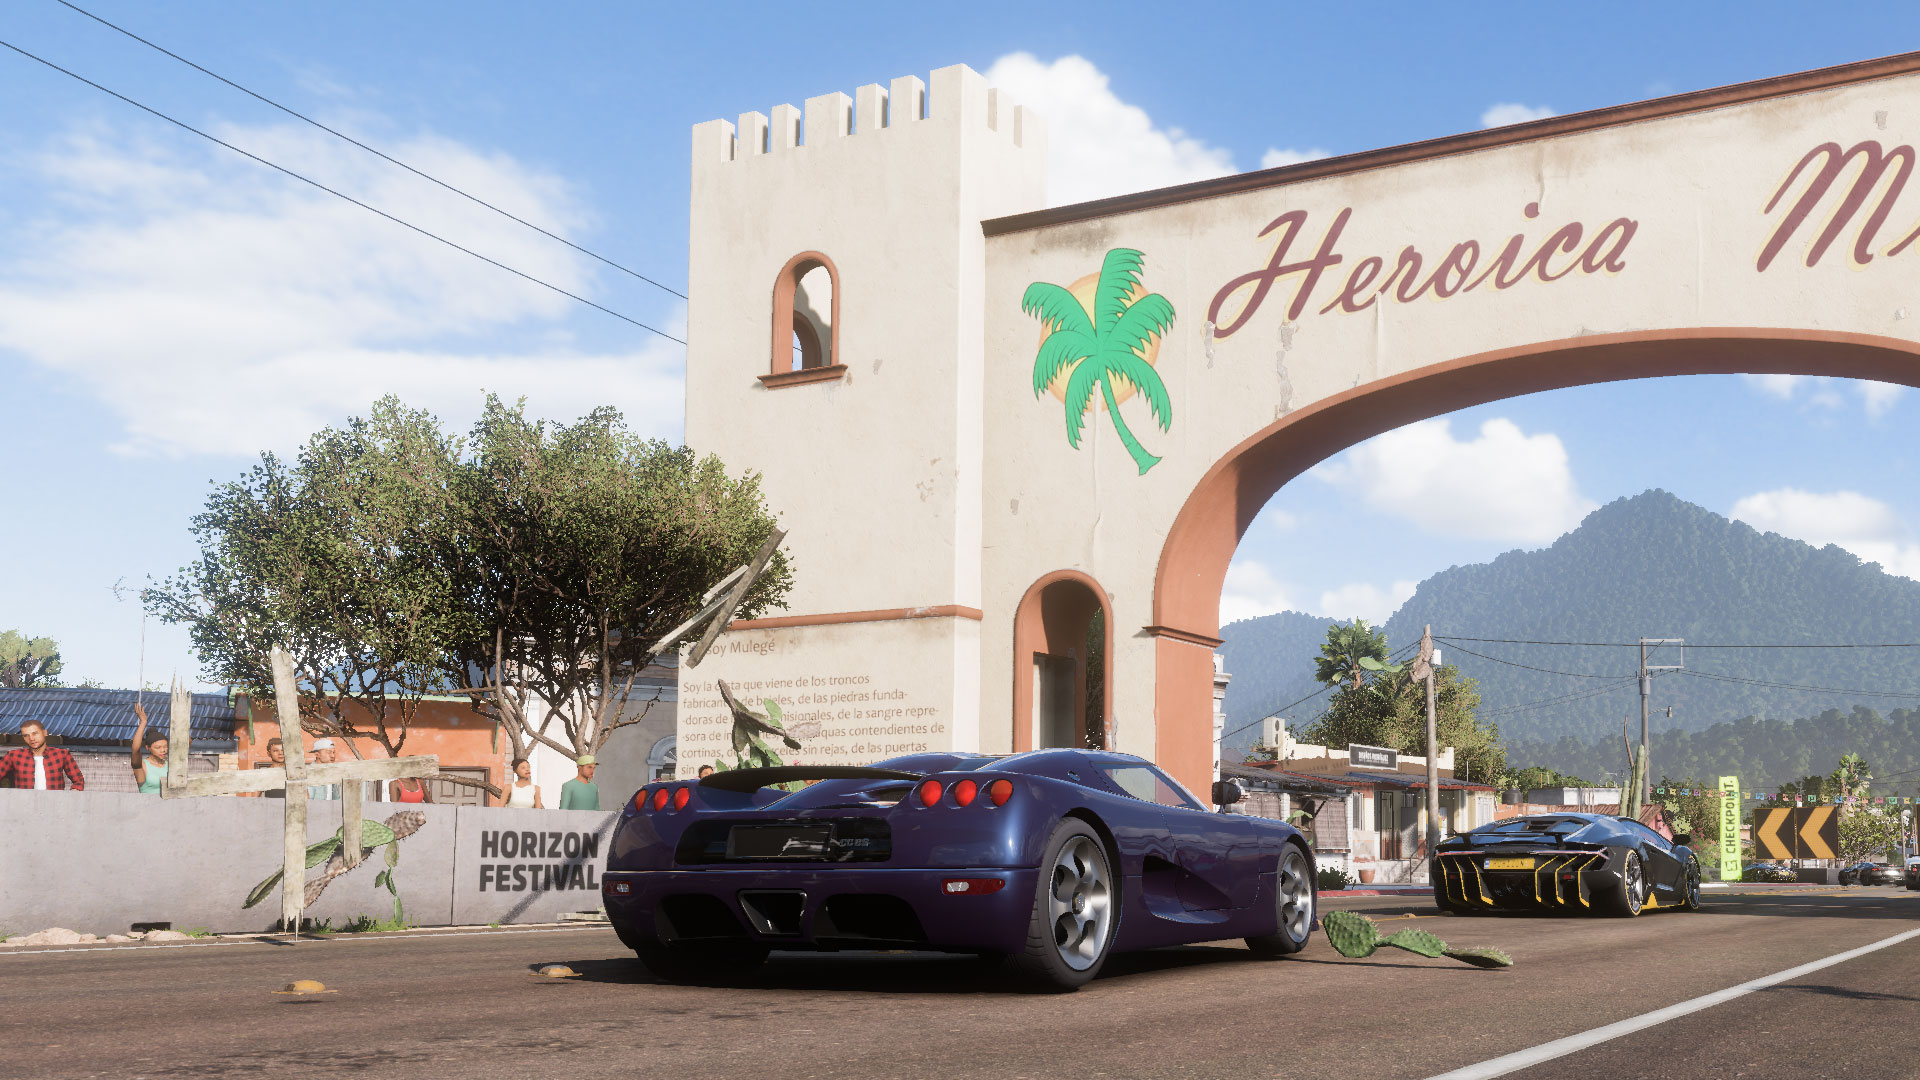 Forza Horizon 5 on PC: System requirements, specs, ray tracing